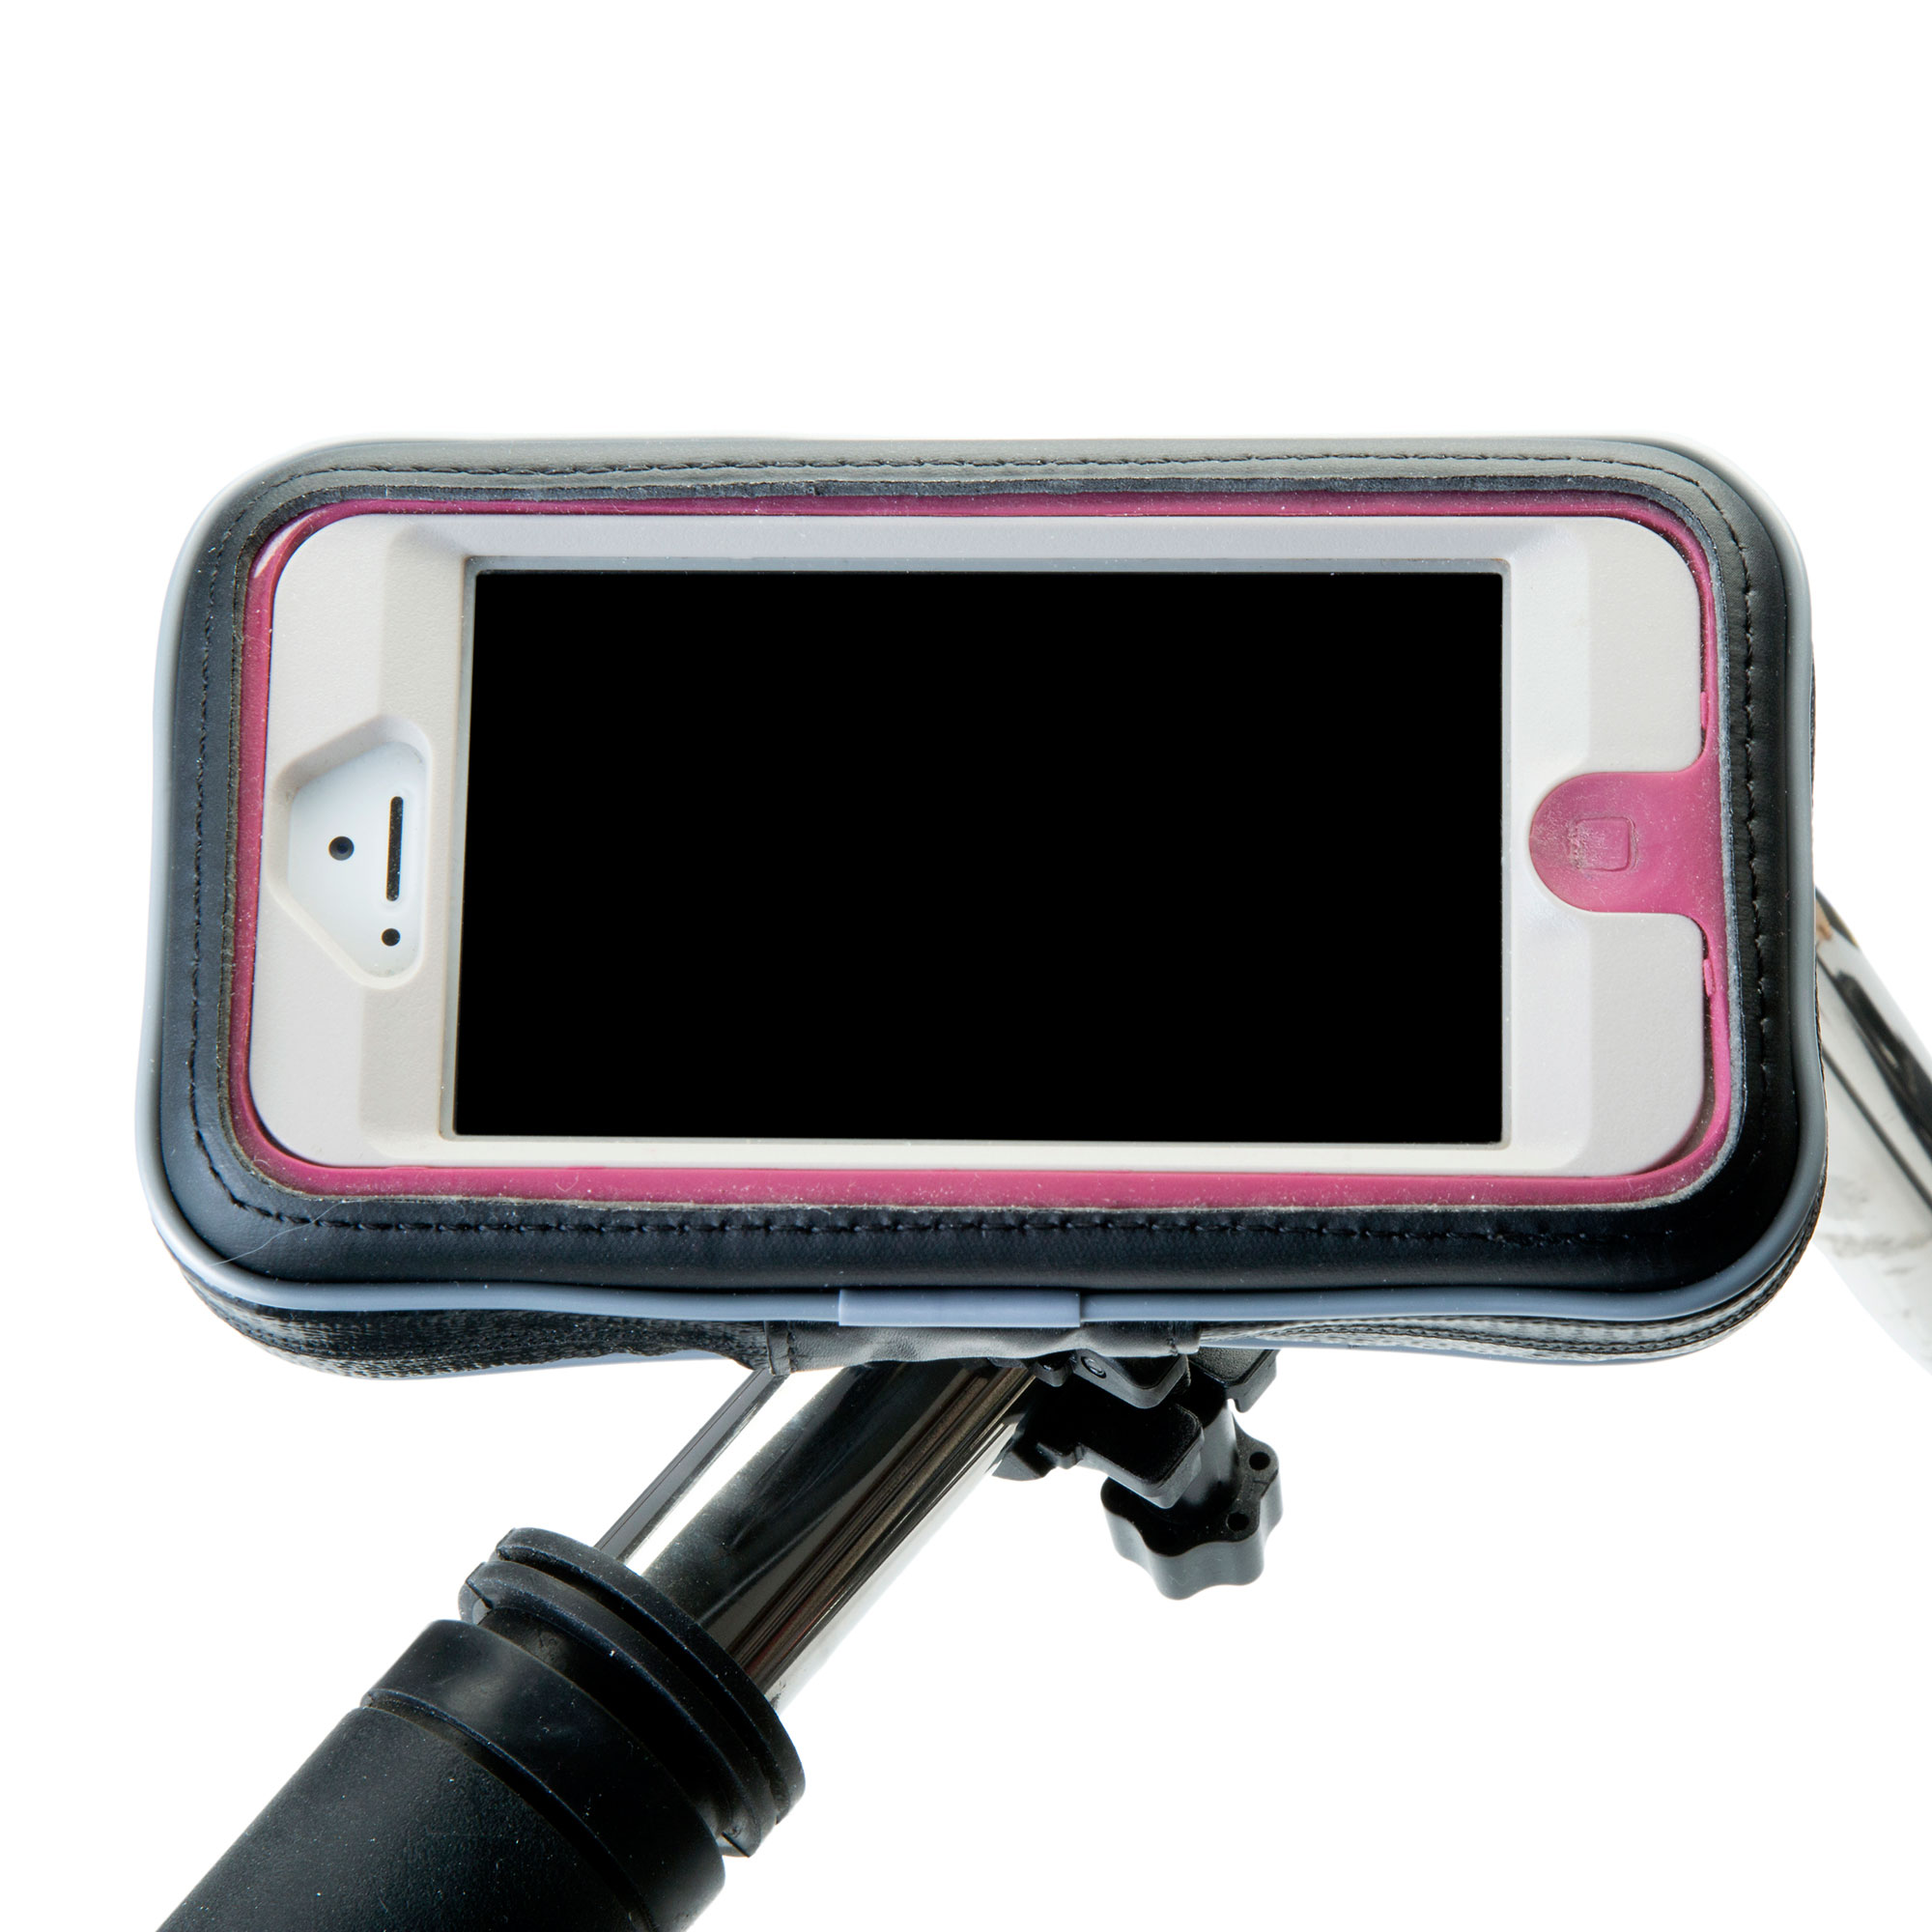 Heavy Duty Weather Resistant Bicycle / Motorcycle Handlebar Mount Holder Designed for the LG Cookie Gig